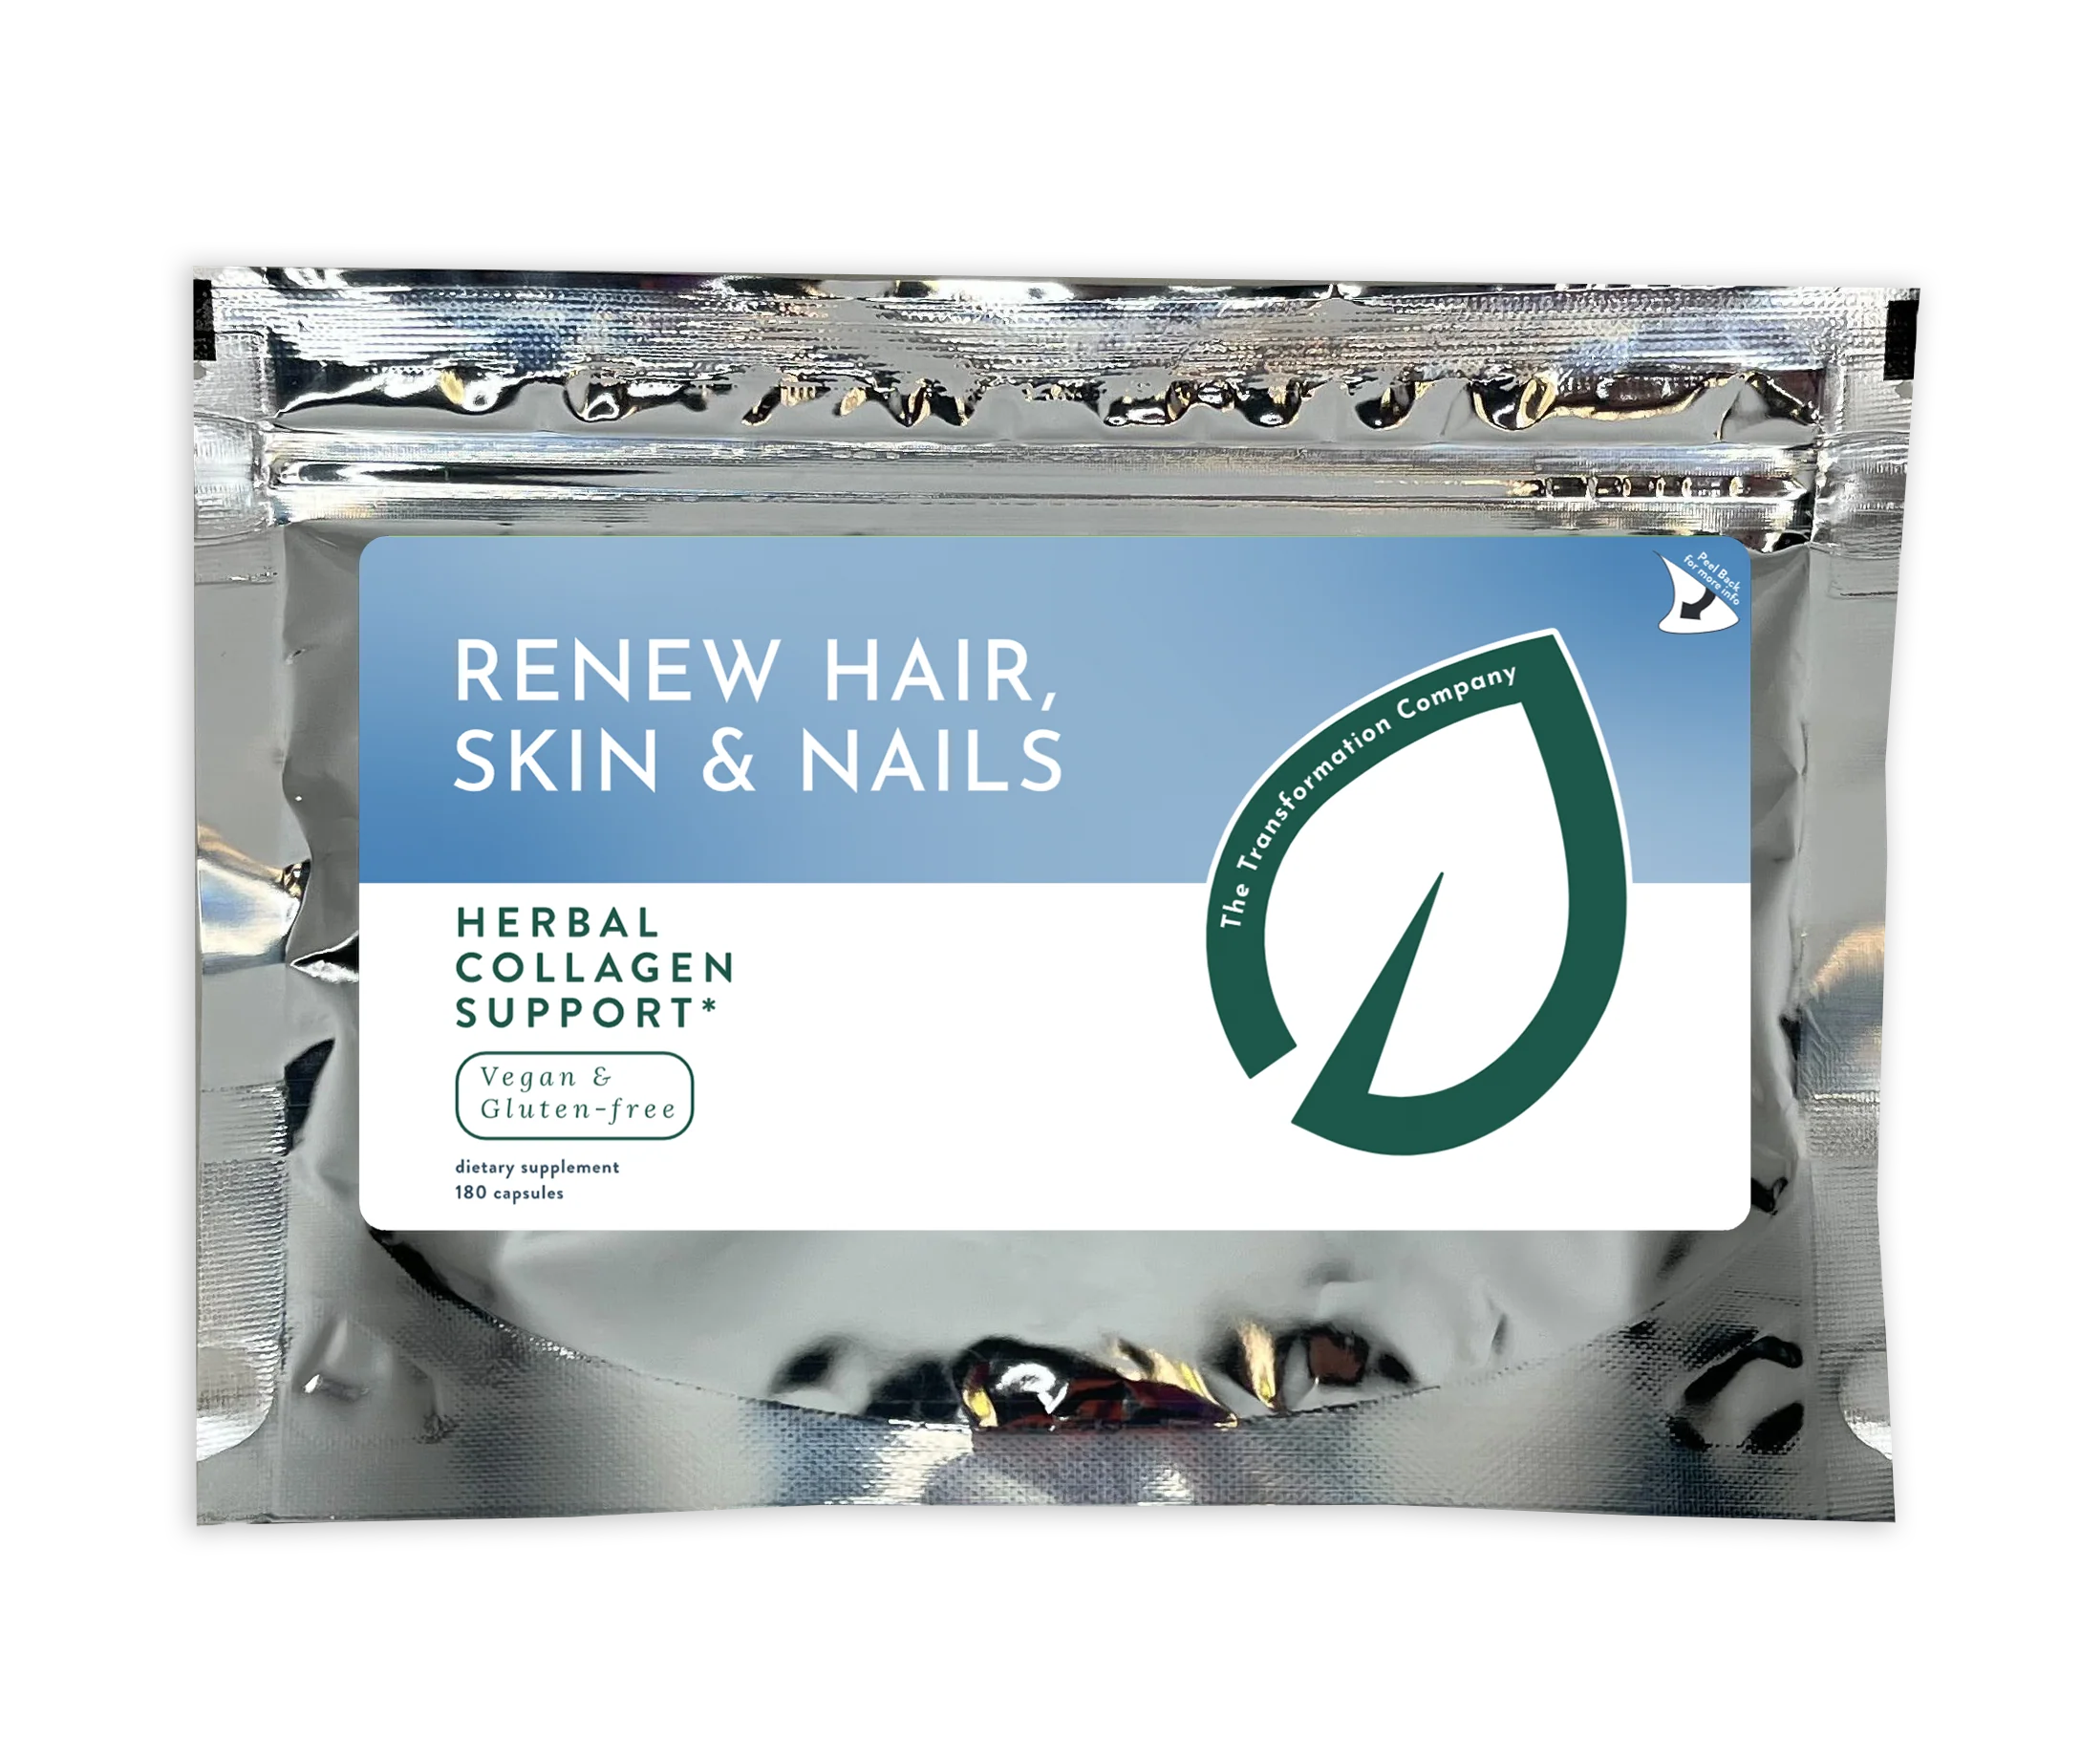 Renew Hair Skin and Nails Herbal Collagen Support